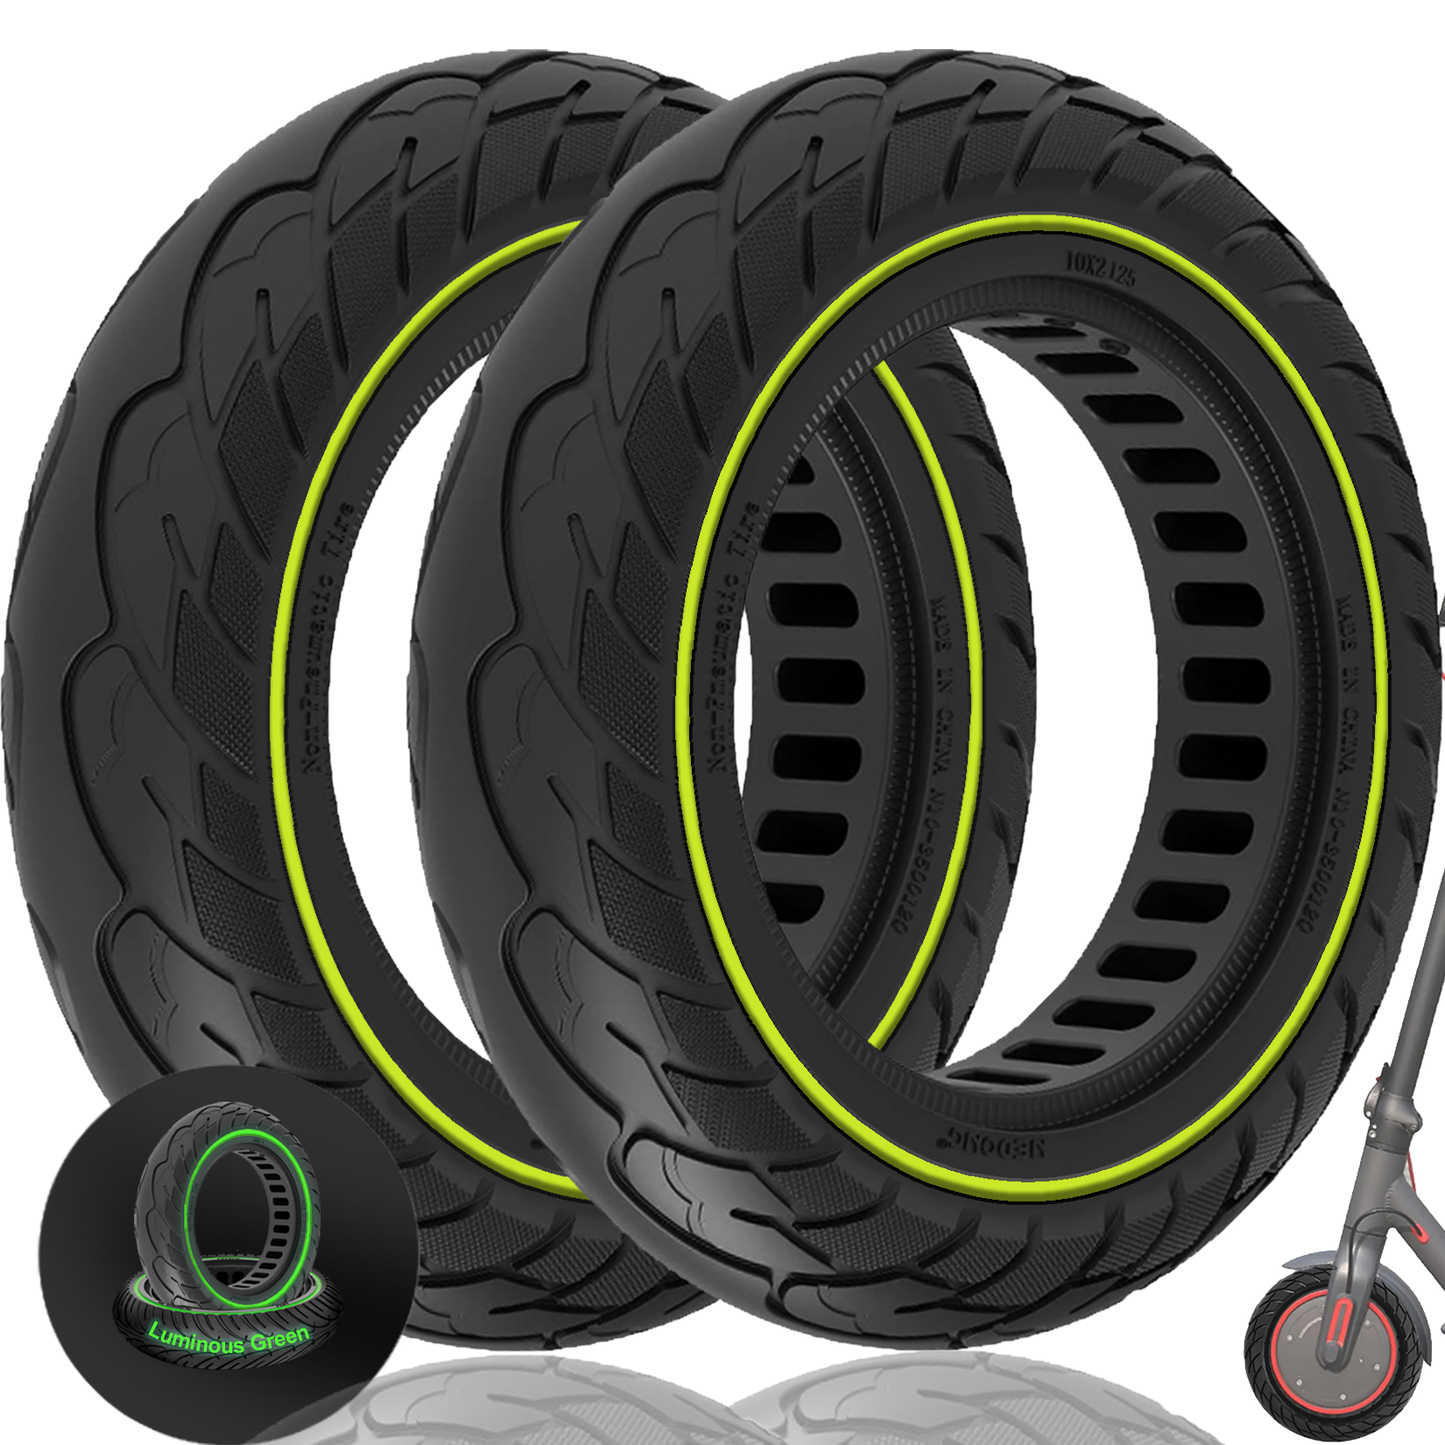 GLDYTIMES 10 inch Solid Rubber Tire, 10x2.125, 50/75-6.1 Tubeless Tyre for Xiaomi M365/Pro 1s/Pro 2, Gotrax G4/Xr/V2 Electric Scooter, 10x2 Puncture-Proof Explosion-Proof Wheel Replacement（Luminous Green 2pcs）